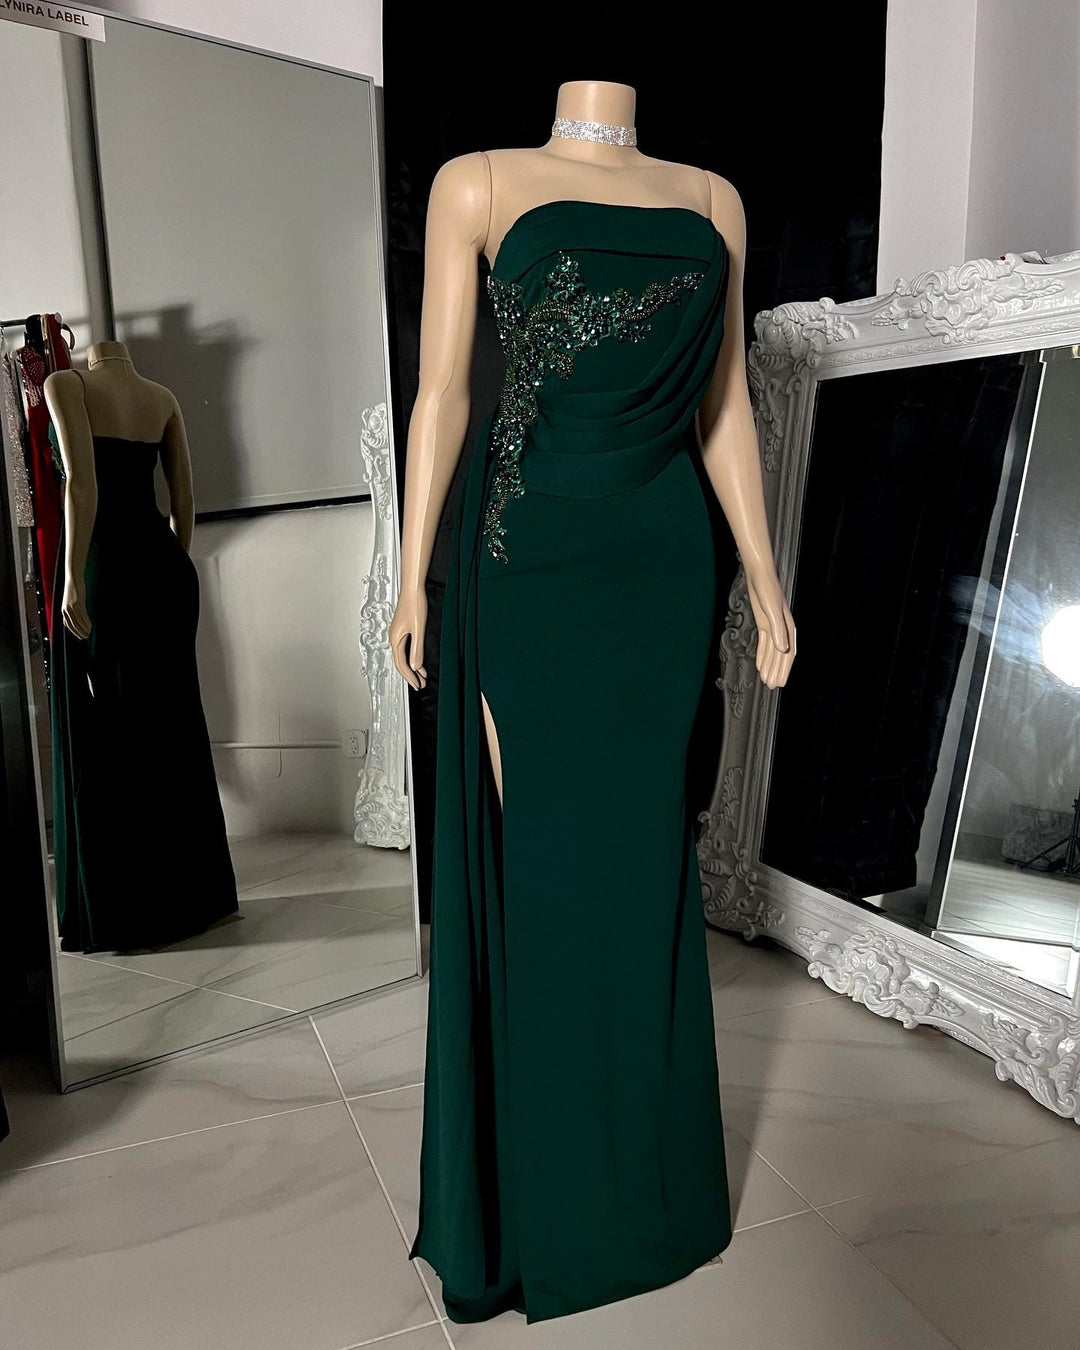 The Avril Gown